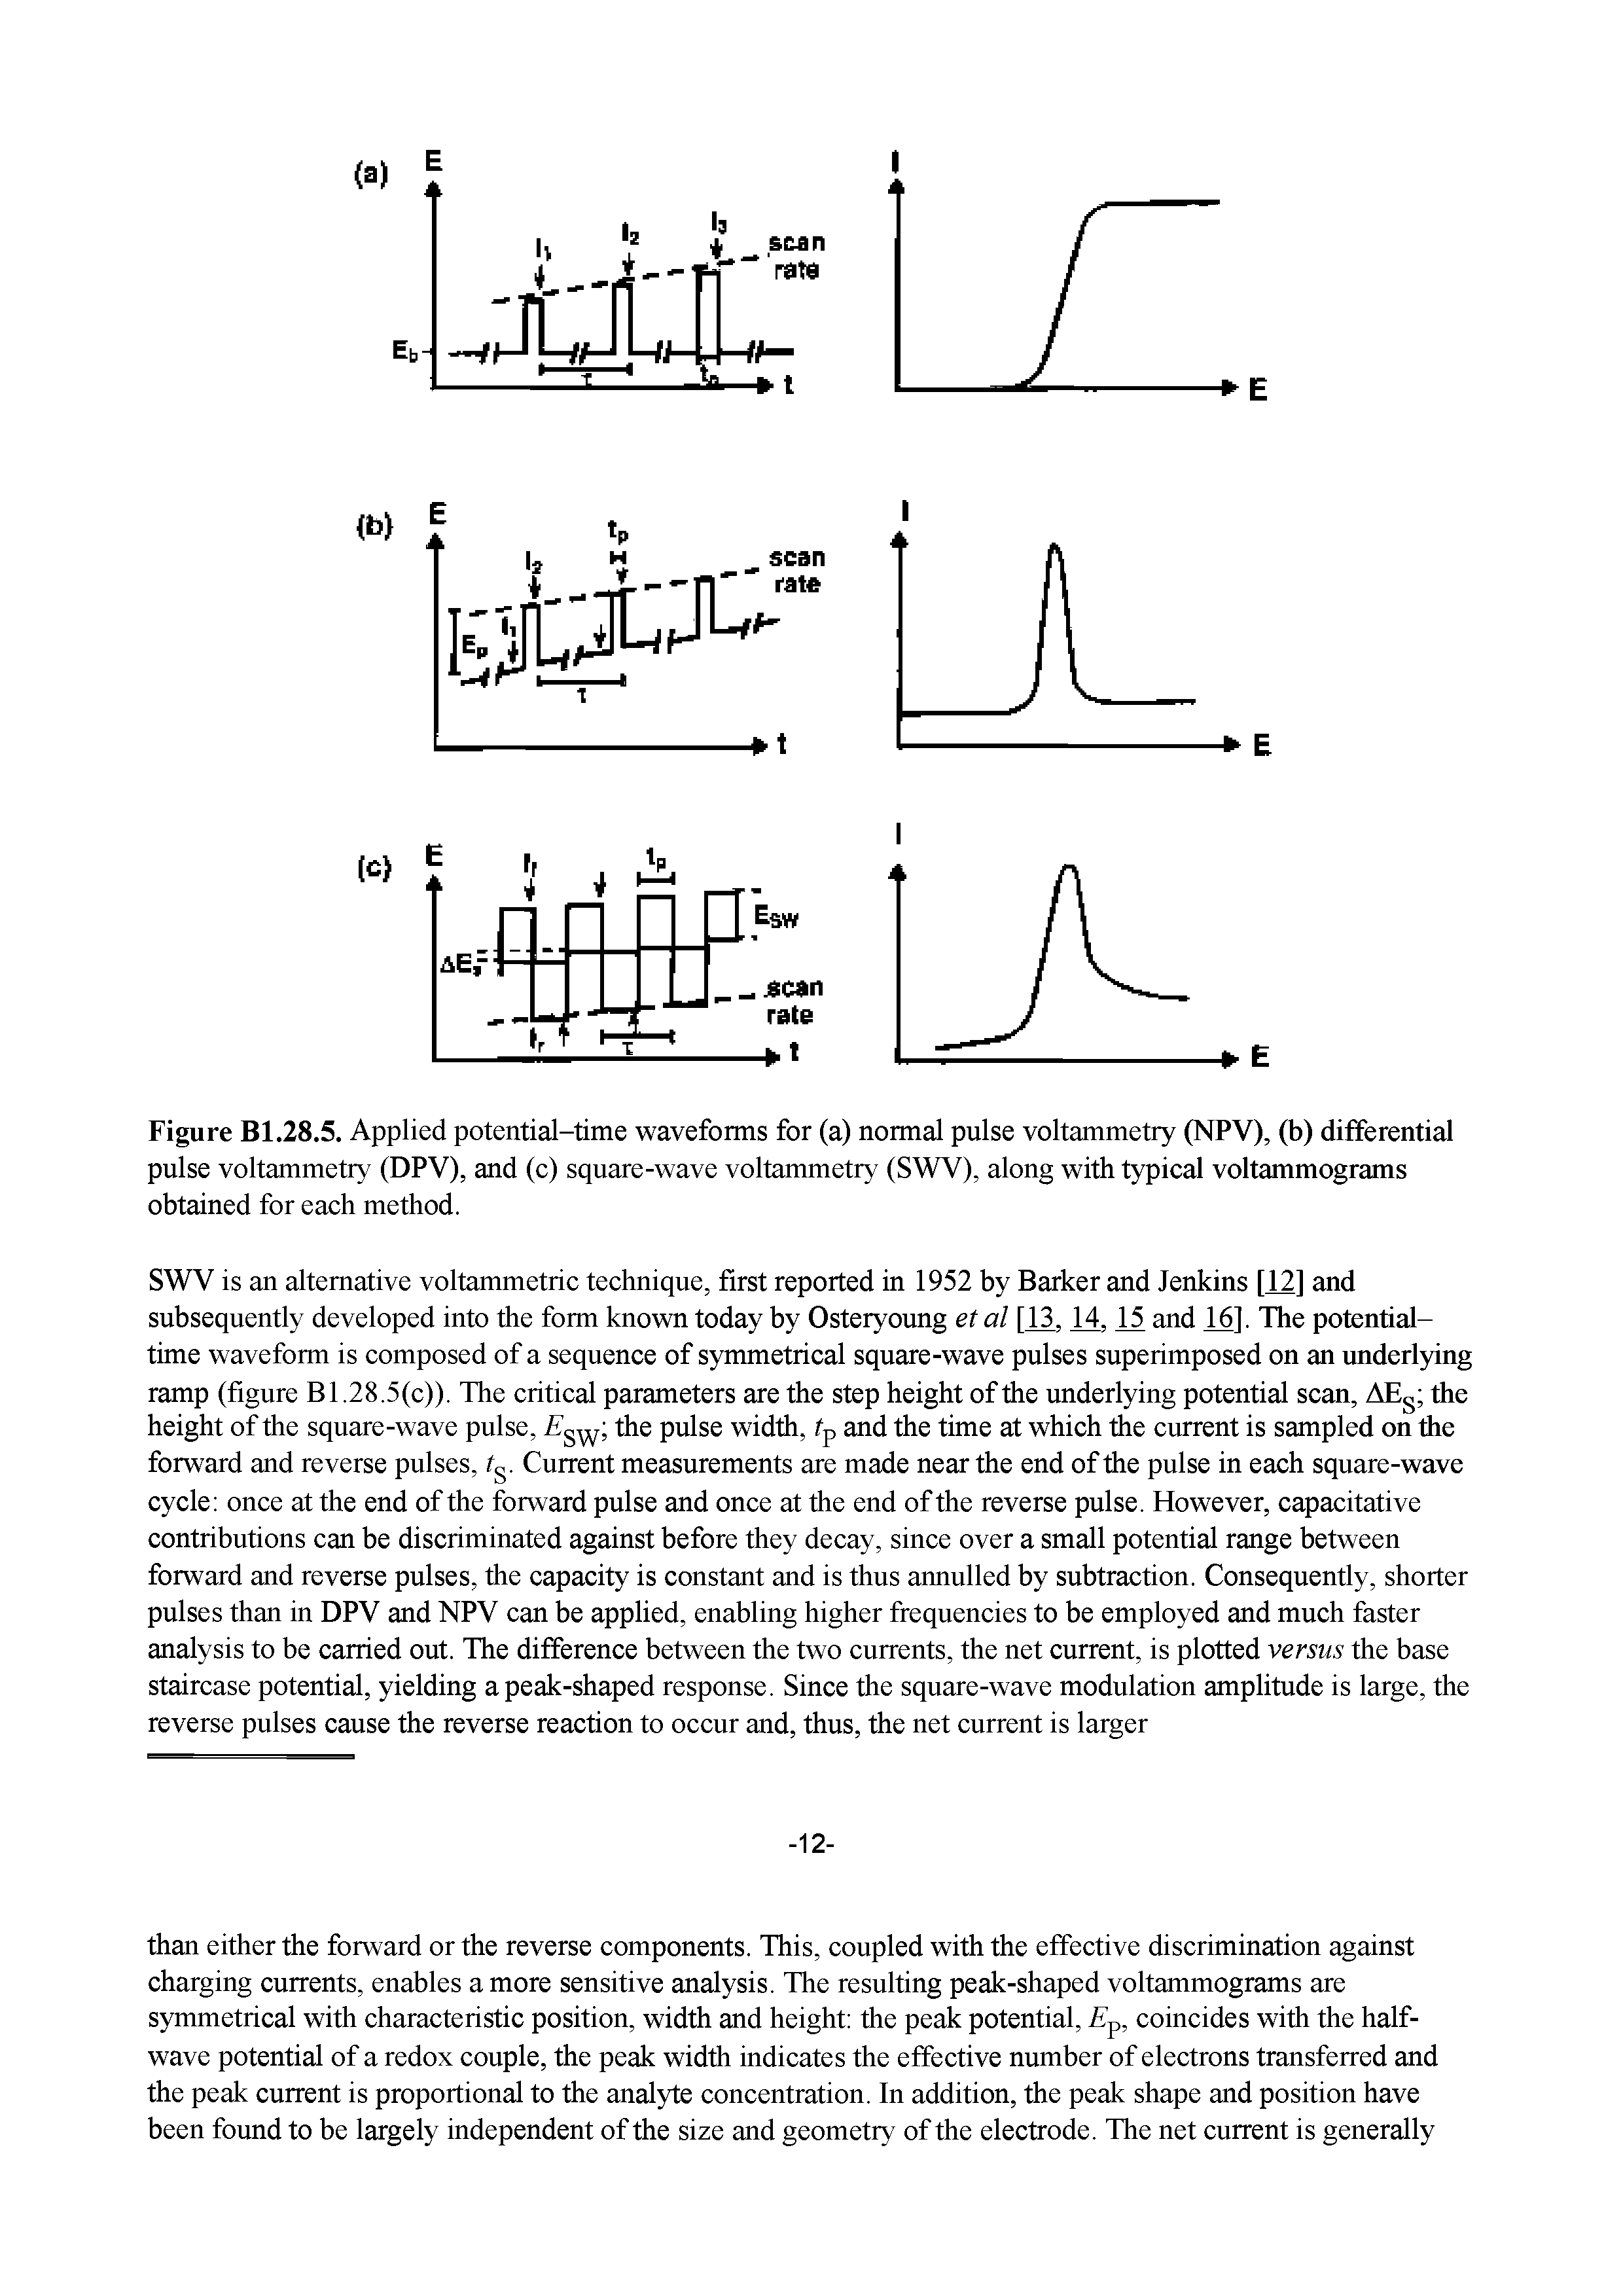 Figure Bl.28.5. Applied potential-time waveforms for (a) normal pulse voltammetry (NPV), (b) differential pulse voltammetry (DPV), and (c) square-wave voltammetry (SWV), along with typical voltammograms obtained for each method.